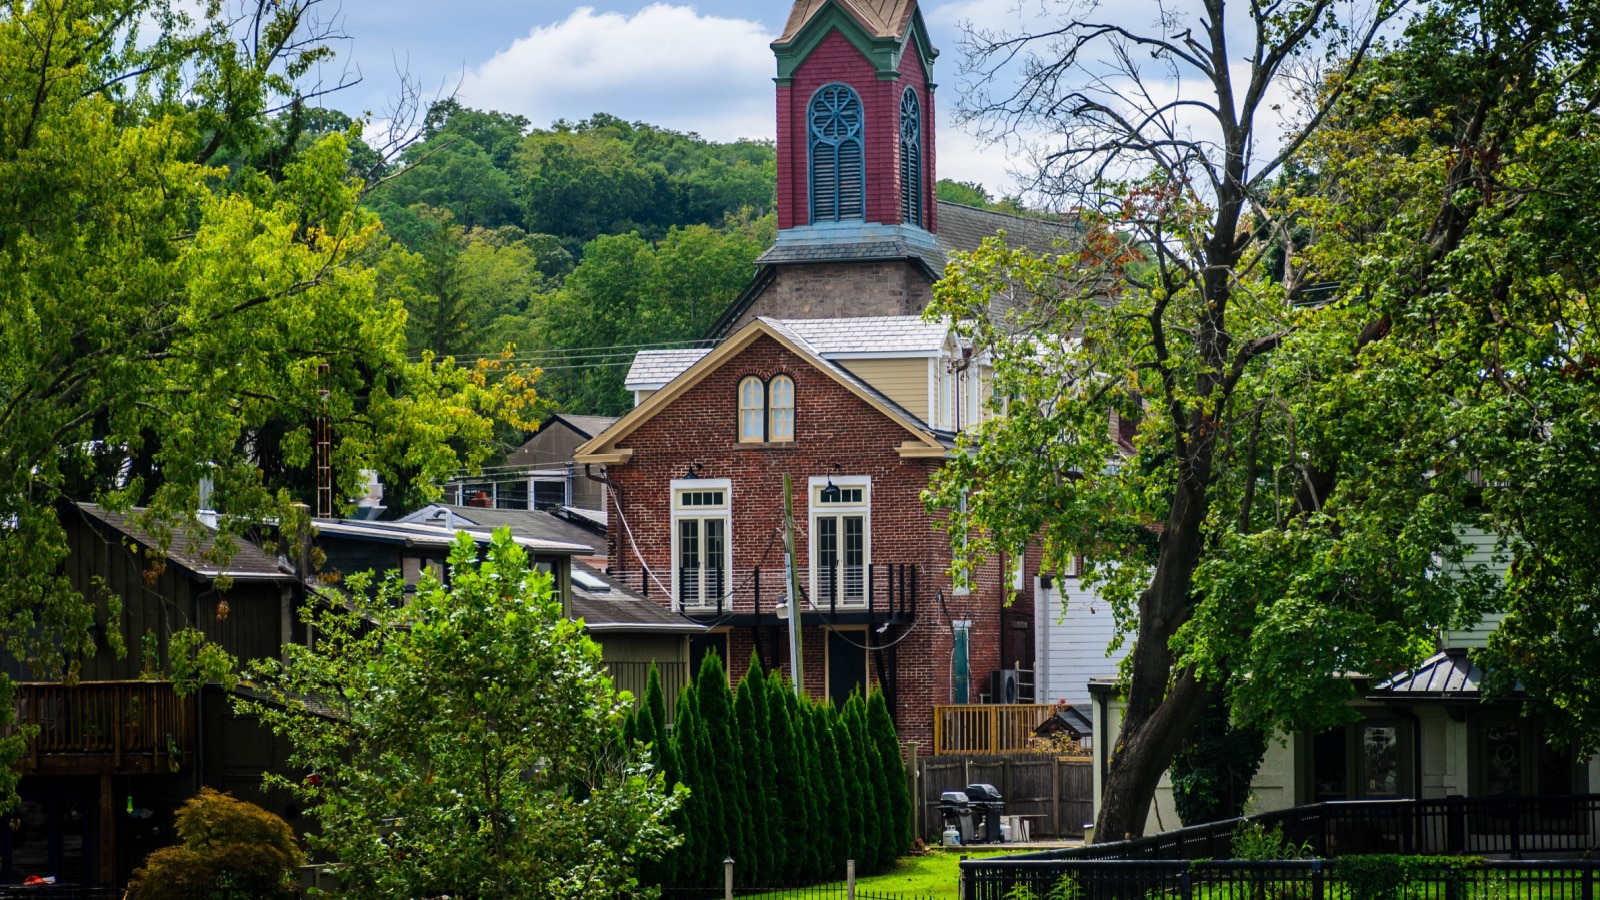 Steeple Building In Historic New Hope PA